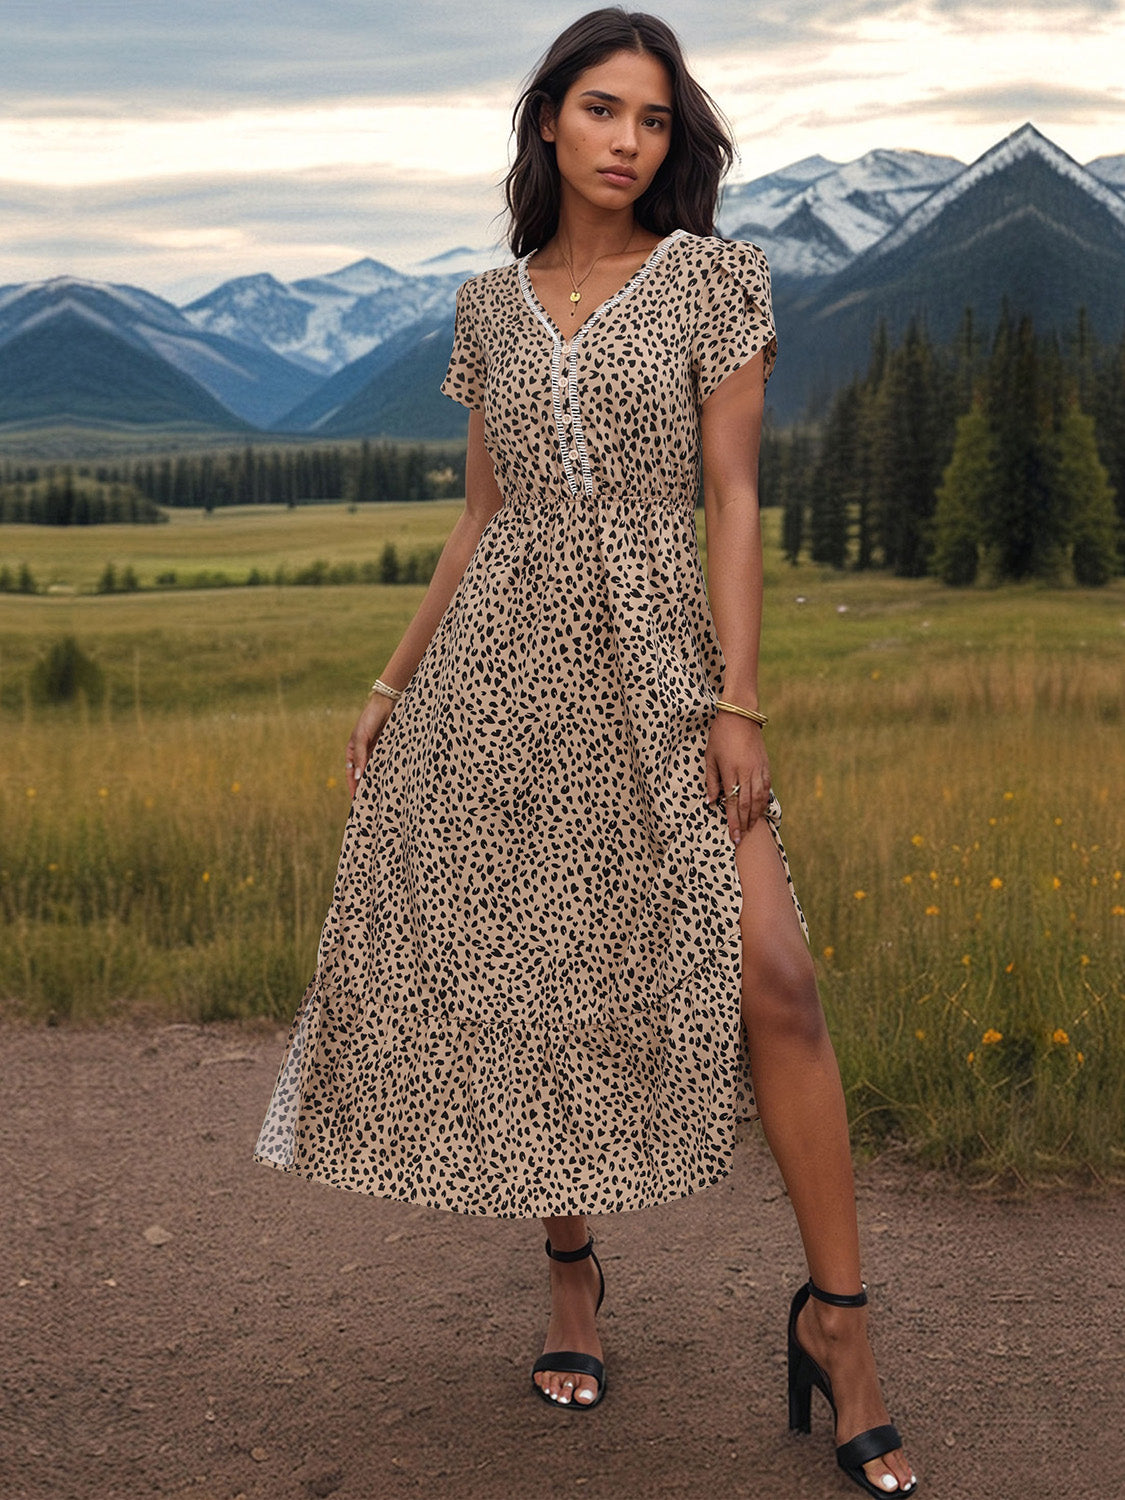 Chic V-Neck Dress with a playful print, elegant slit, and comfy fit for versatile summer styling. Perfect from day to night.